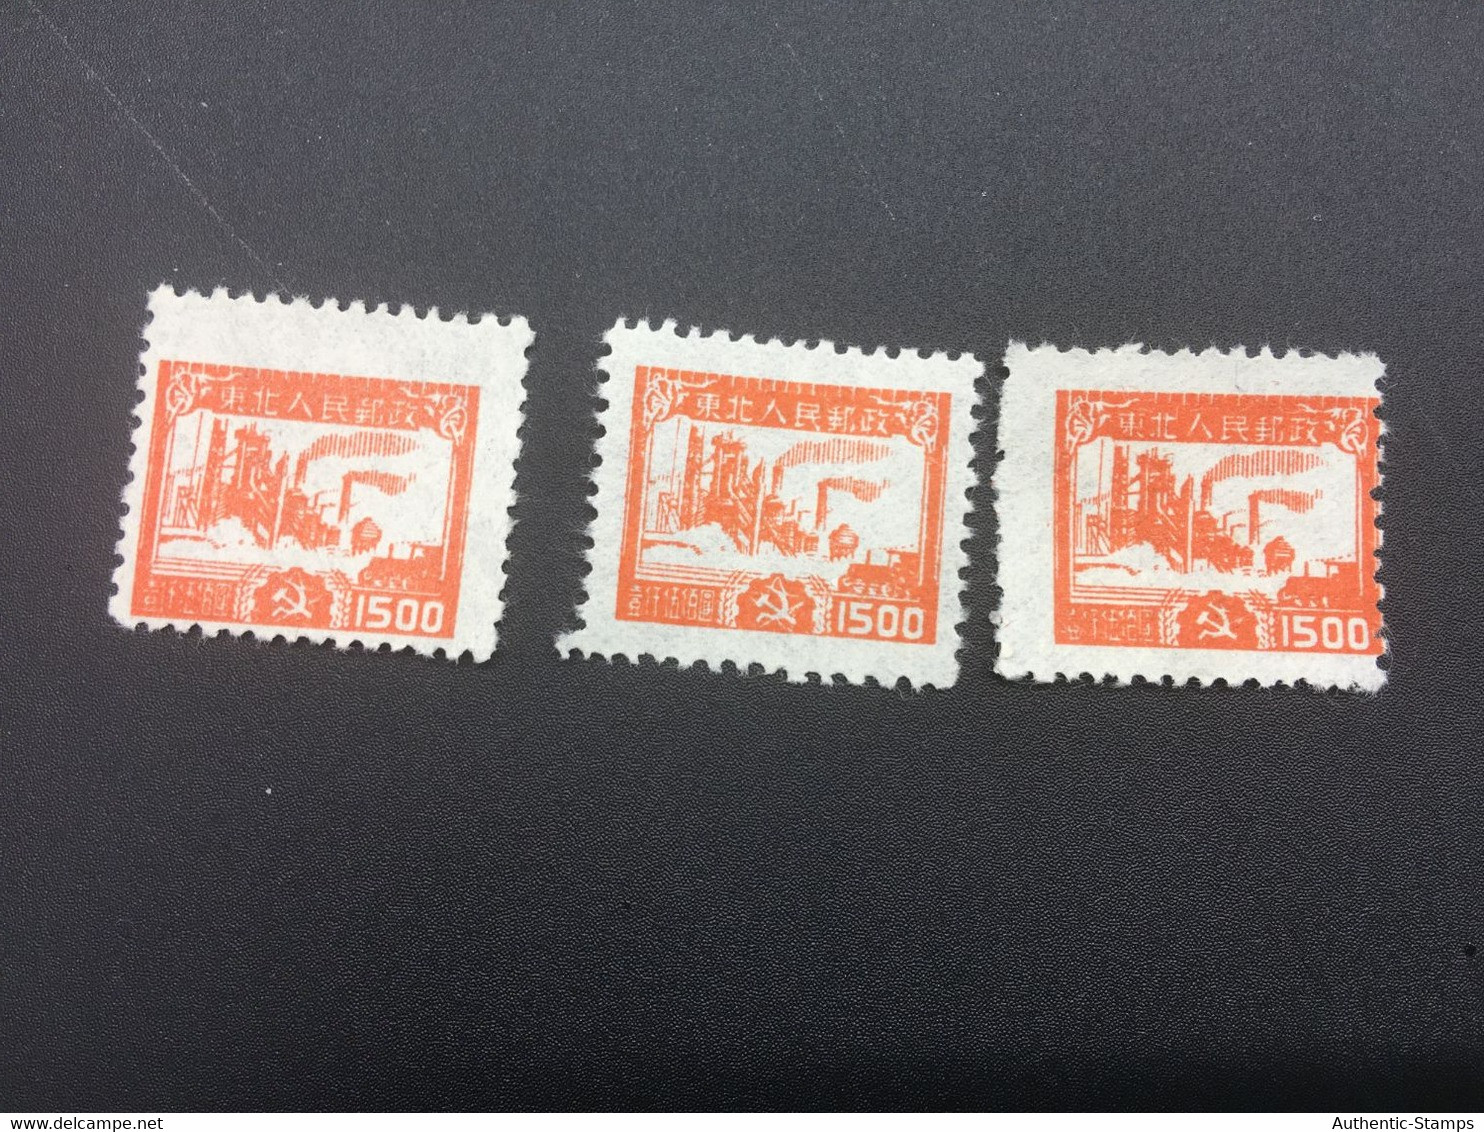 CHINA STAMP, UnUSED, TIMBRO, STEMPEL, CINA, CHINE, LIST 6175 - Chine Du Nord-Est 1946-48